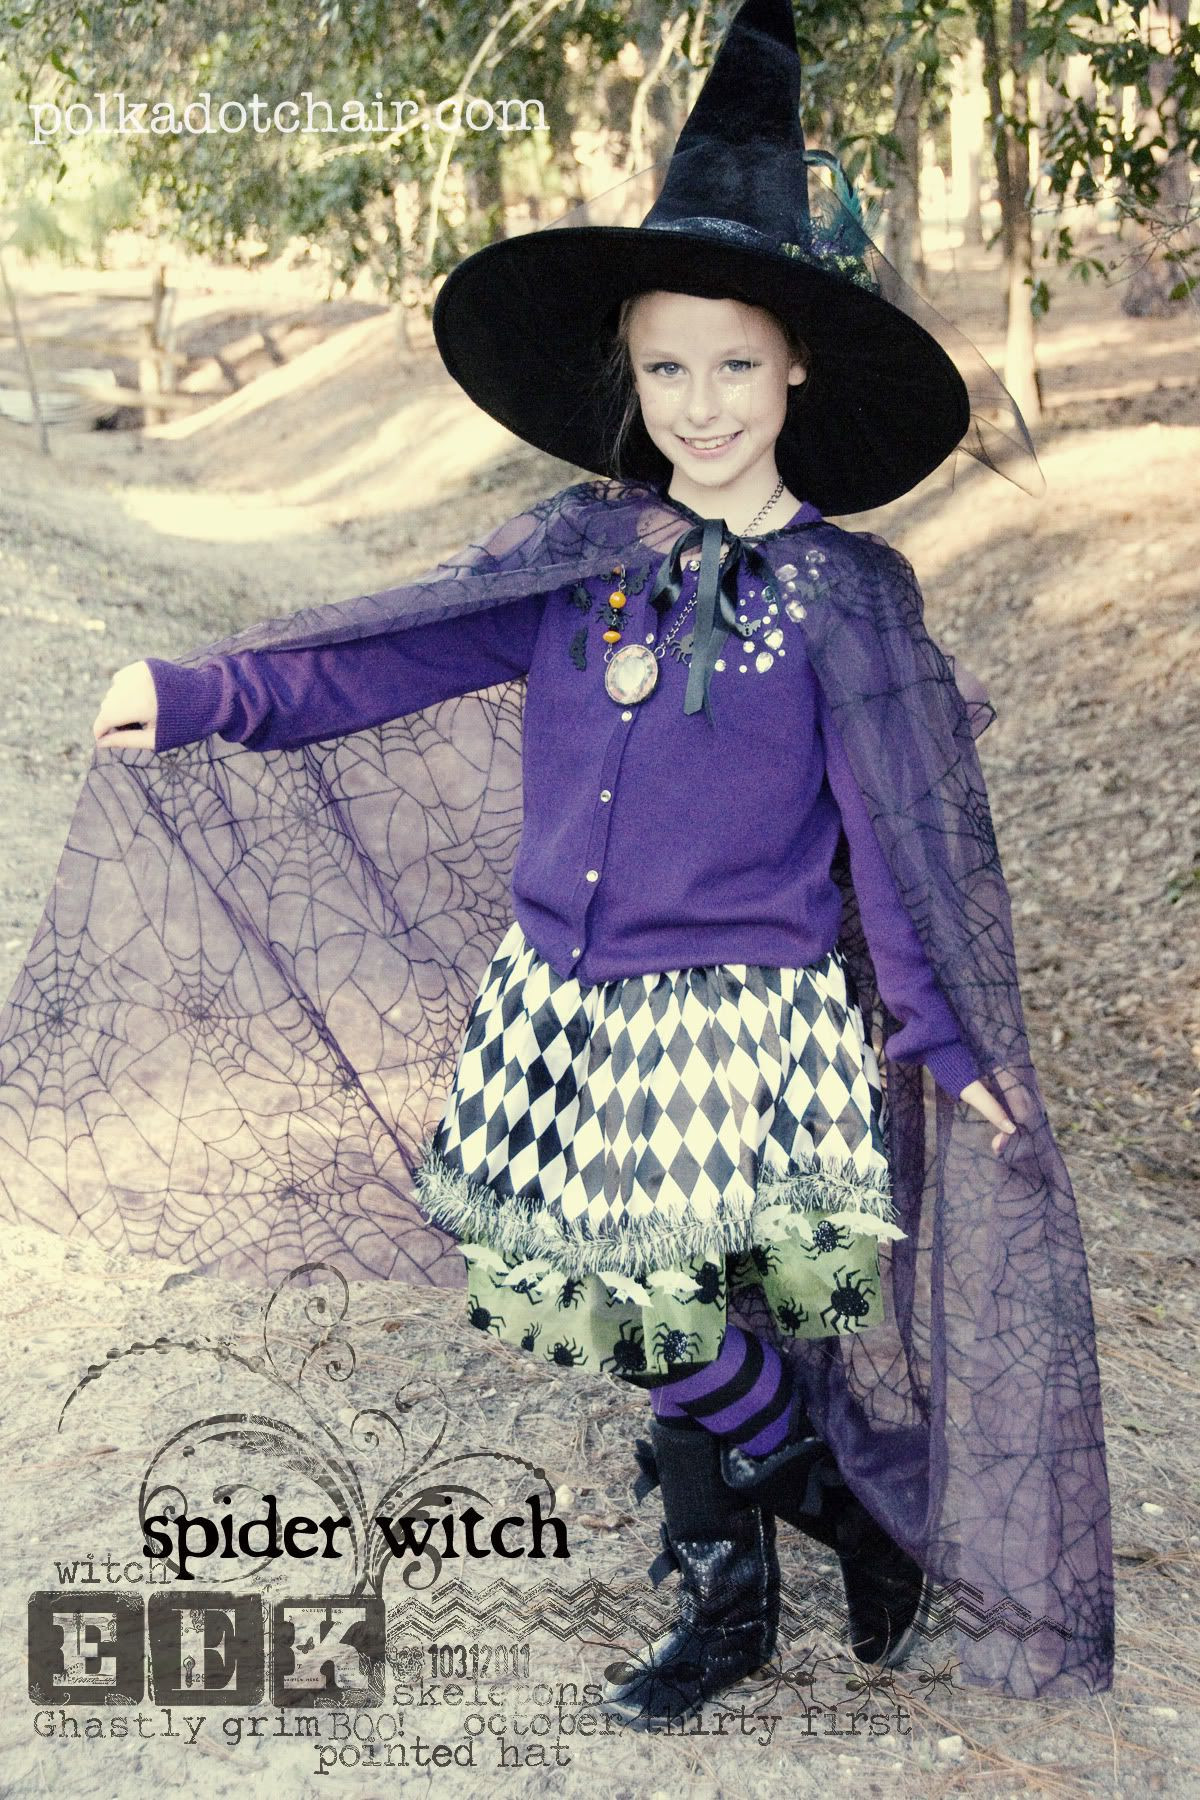 DIY Witch Costume For Kids
 Witches Halloween Costume Ideas The Polkadot Chair